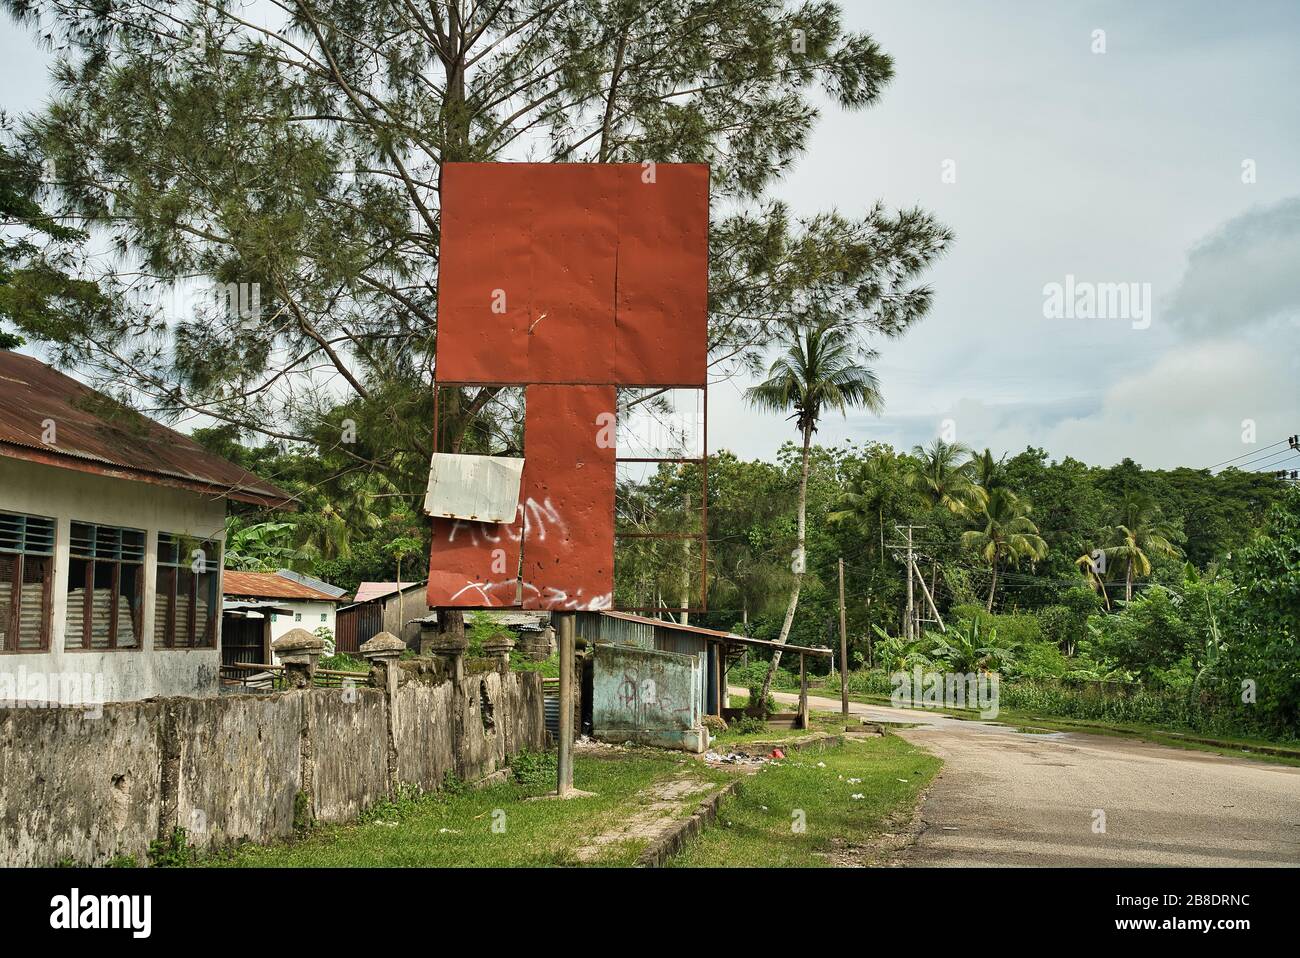 Old, incomplete and dilapidated terracotta red billboard free of advertising on a crowded street in a jungle town. Stock Photo